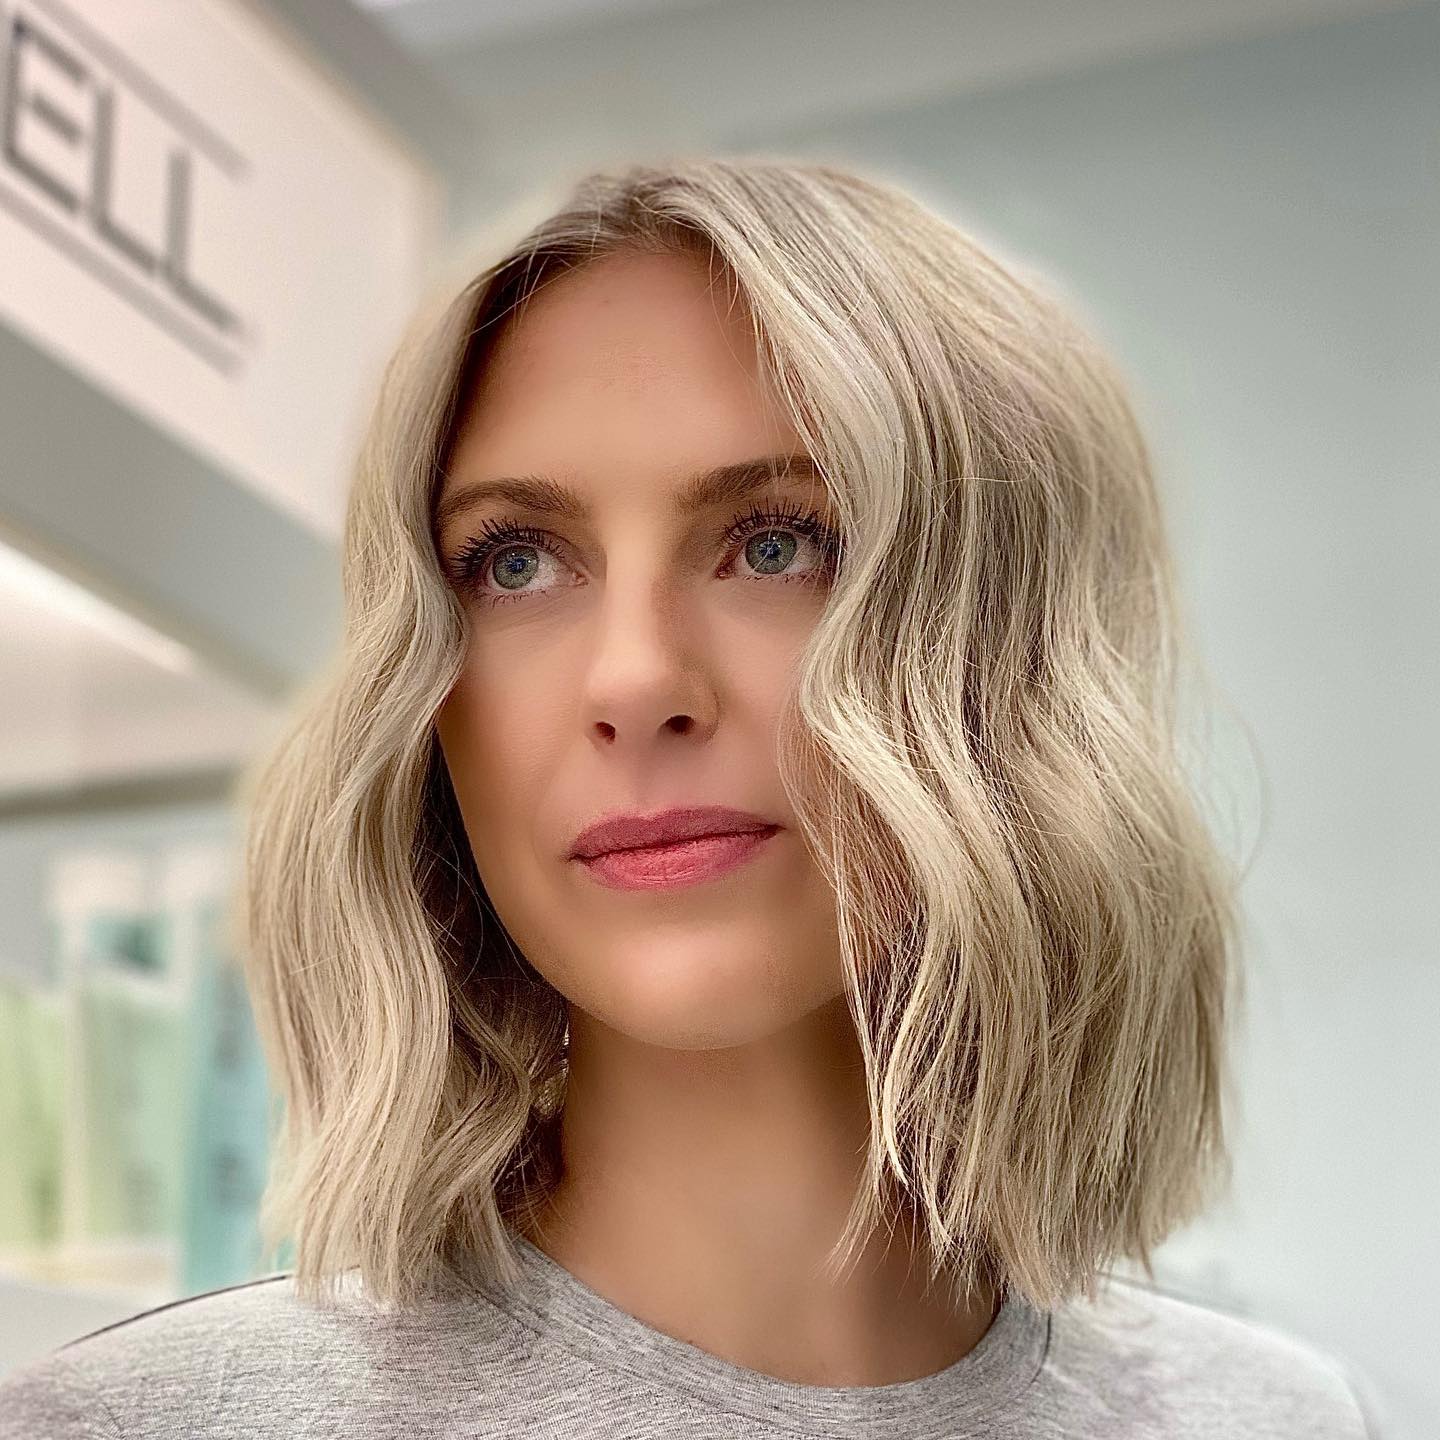 13 Shoulder-Length Haircuts to Show Your Stylist